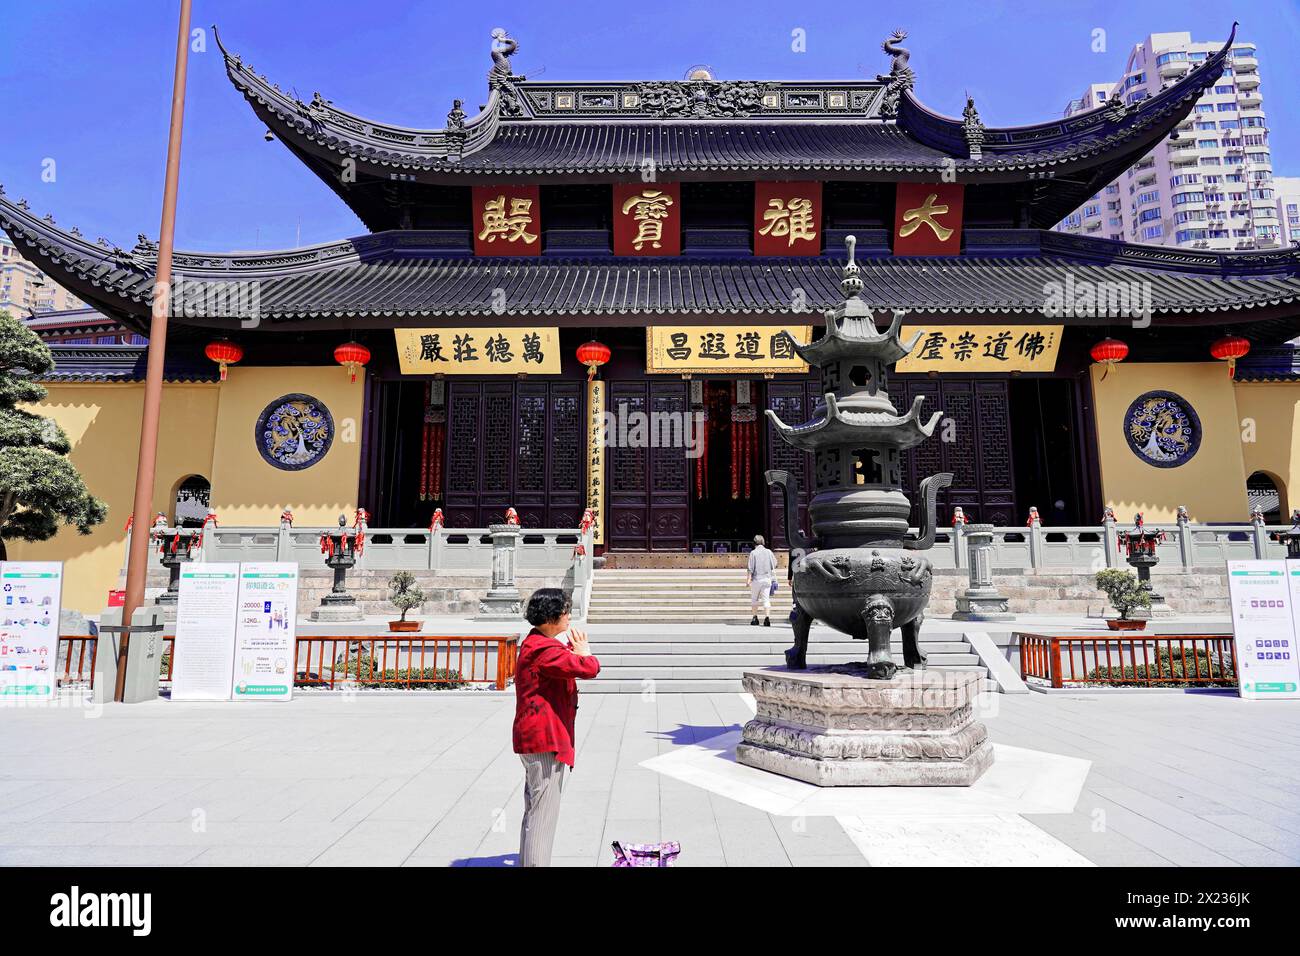 Jade Buddha Temple, Shanghai, View of the forecourt of a temple with traditional Chinese architecture under a blue sky, Shanghai, China Stock Photo